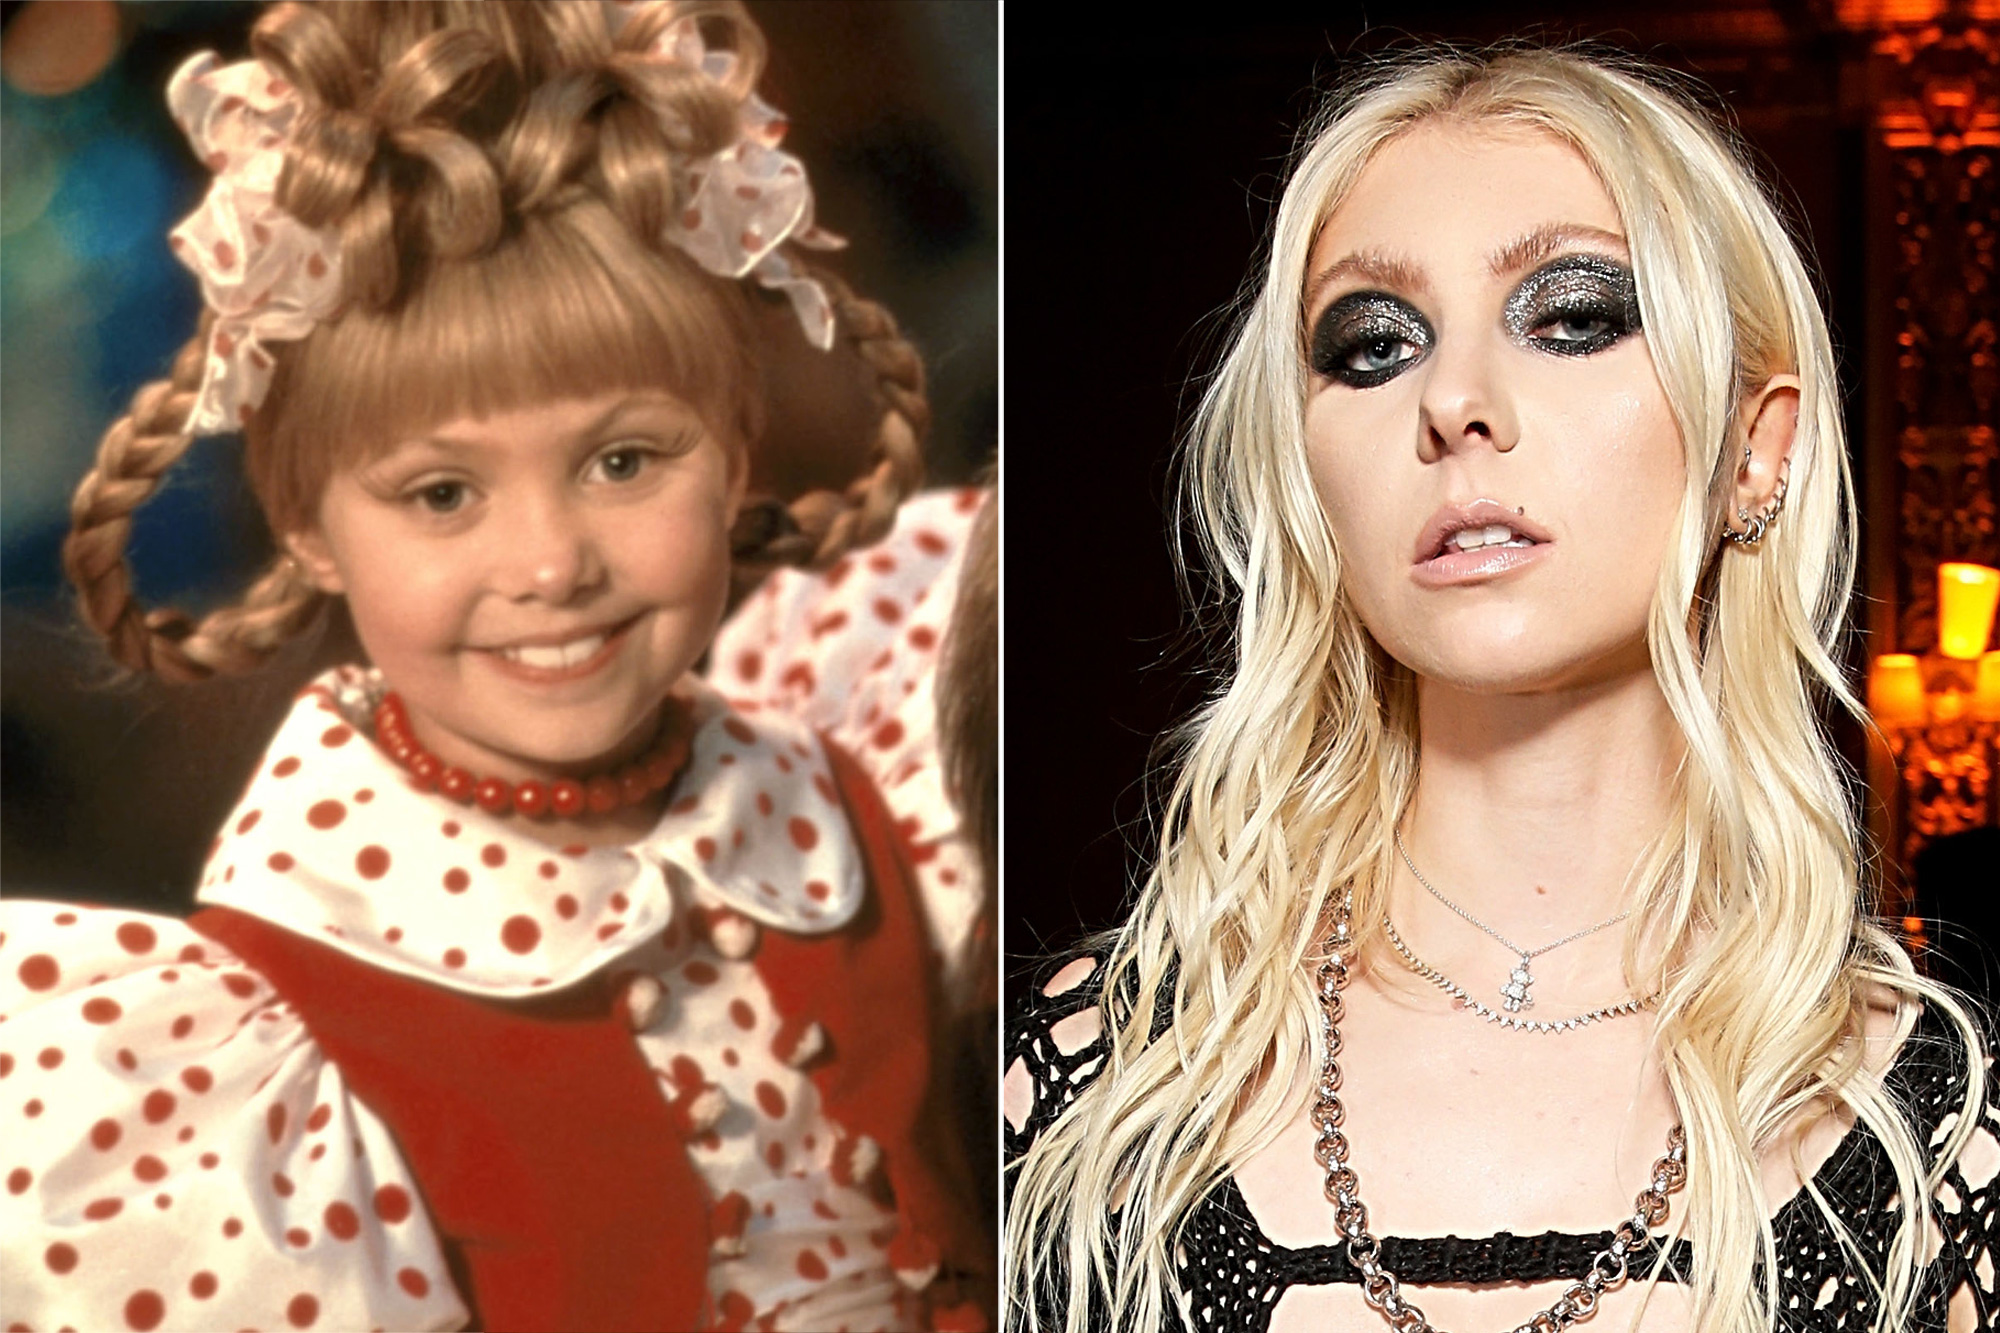 DR. SEUSS' HOW THE GRINCH STOLE CHRISTMAS, Taylor Momsen